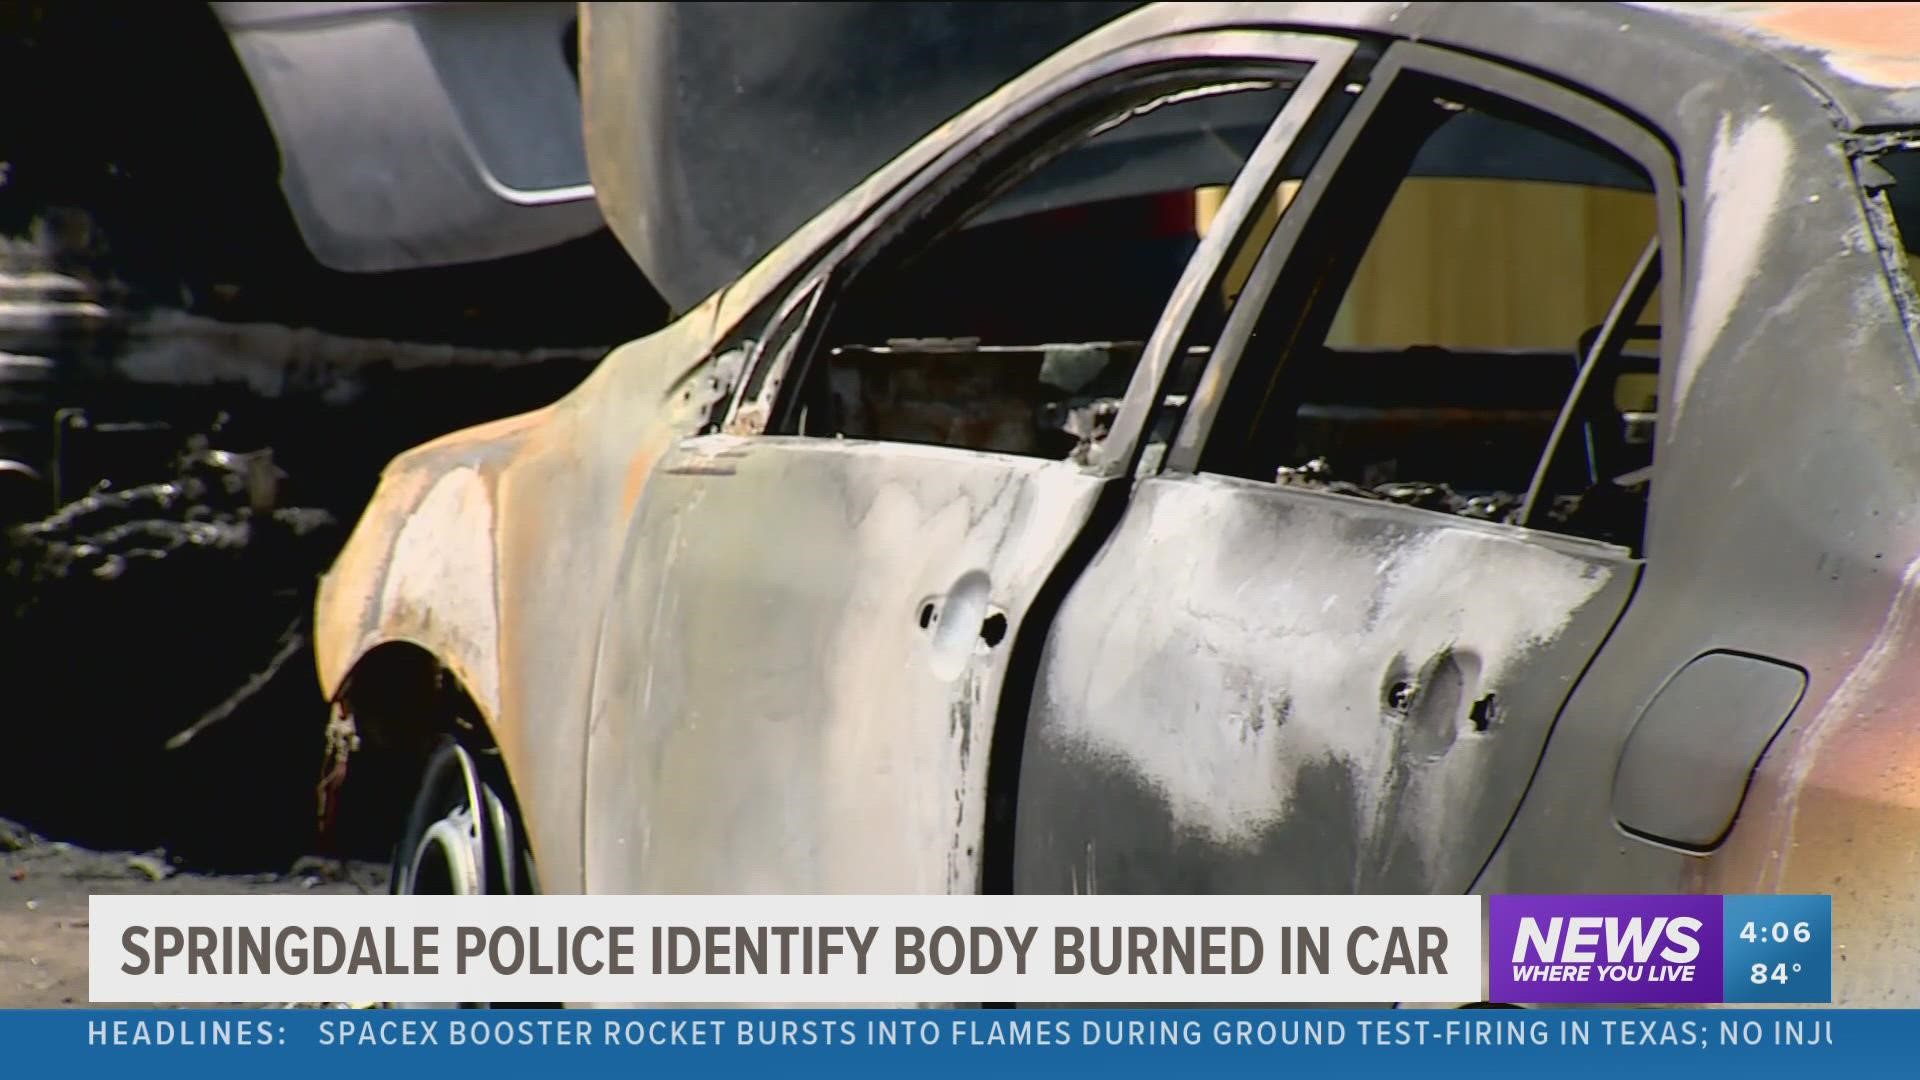 A month after a body was found in a burning vehicle in Springdale, police have now identified the victim.